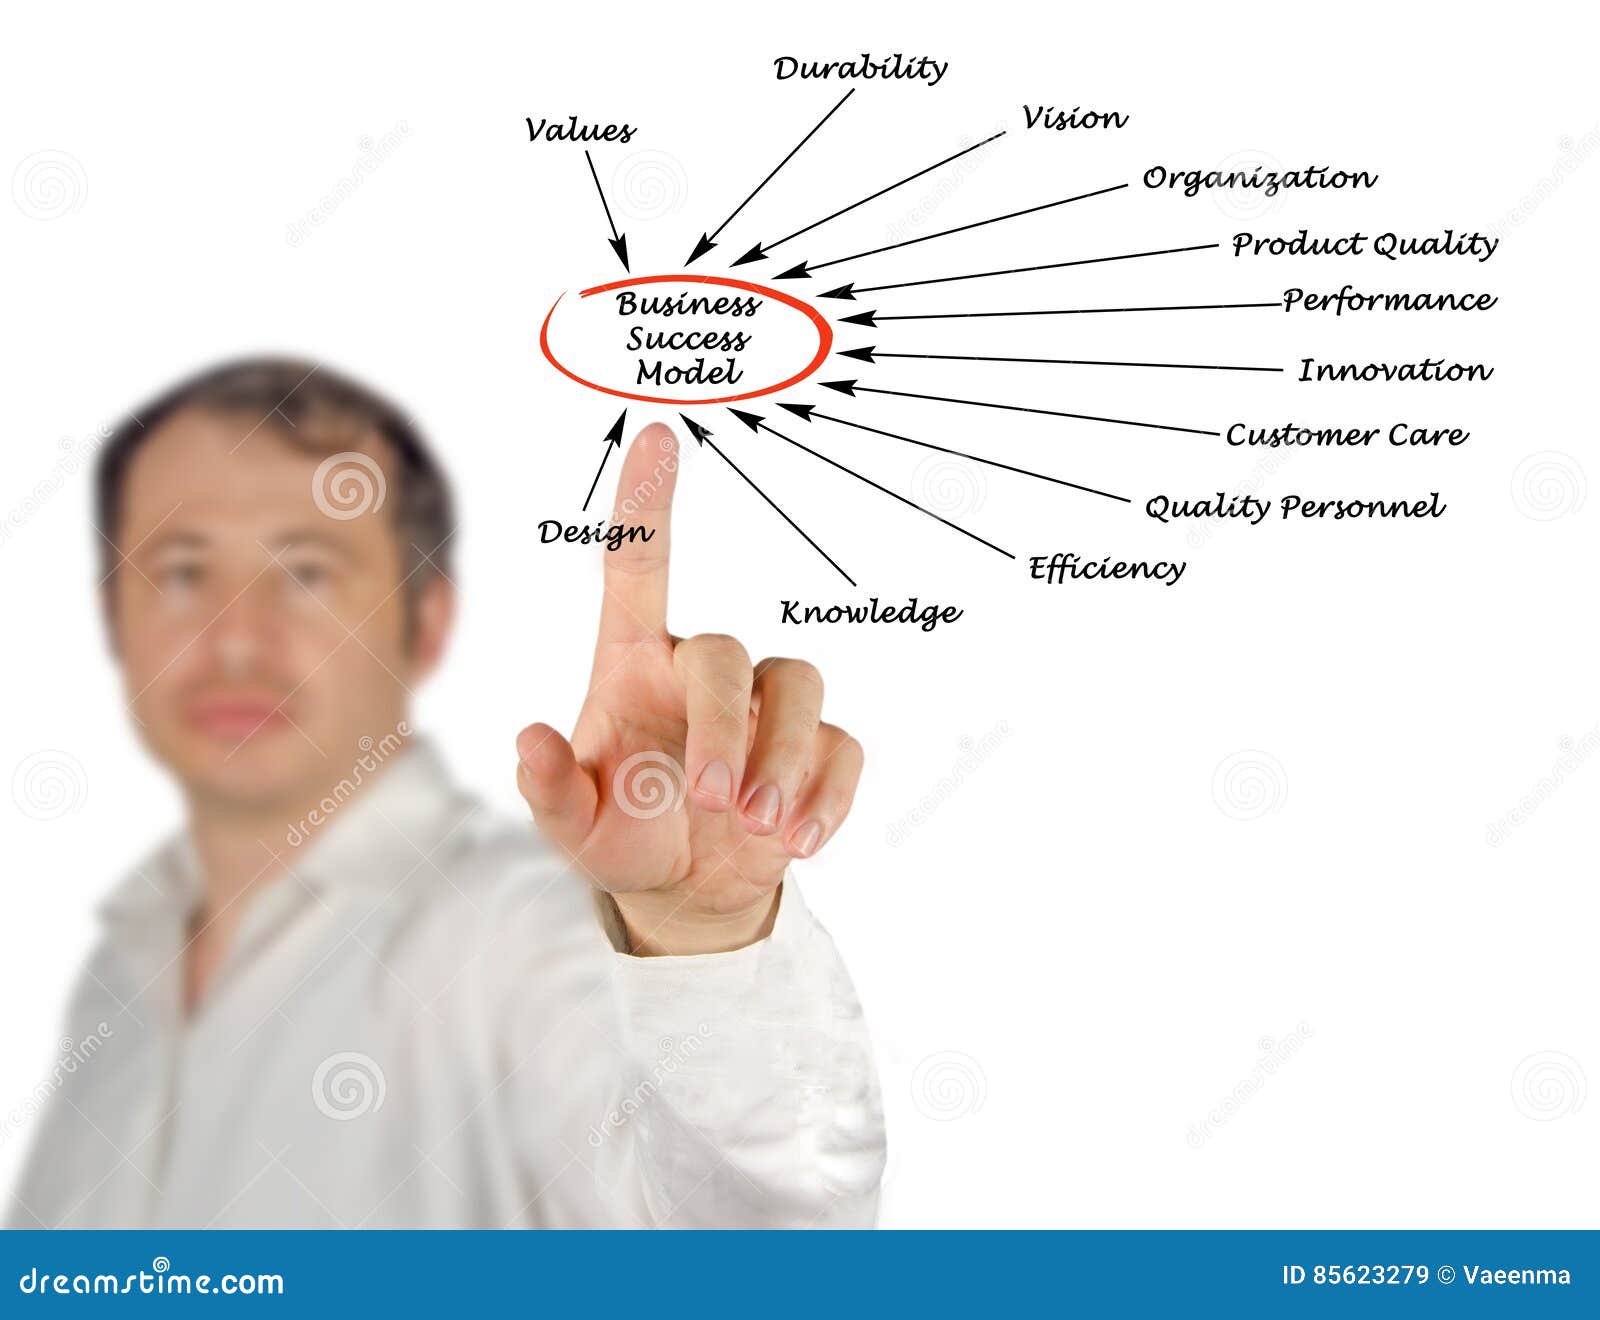 Business Success Model Vision Stock Image - Image of human, innovation ...